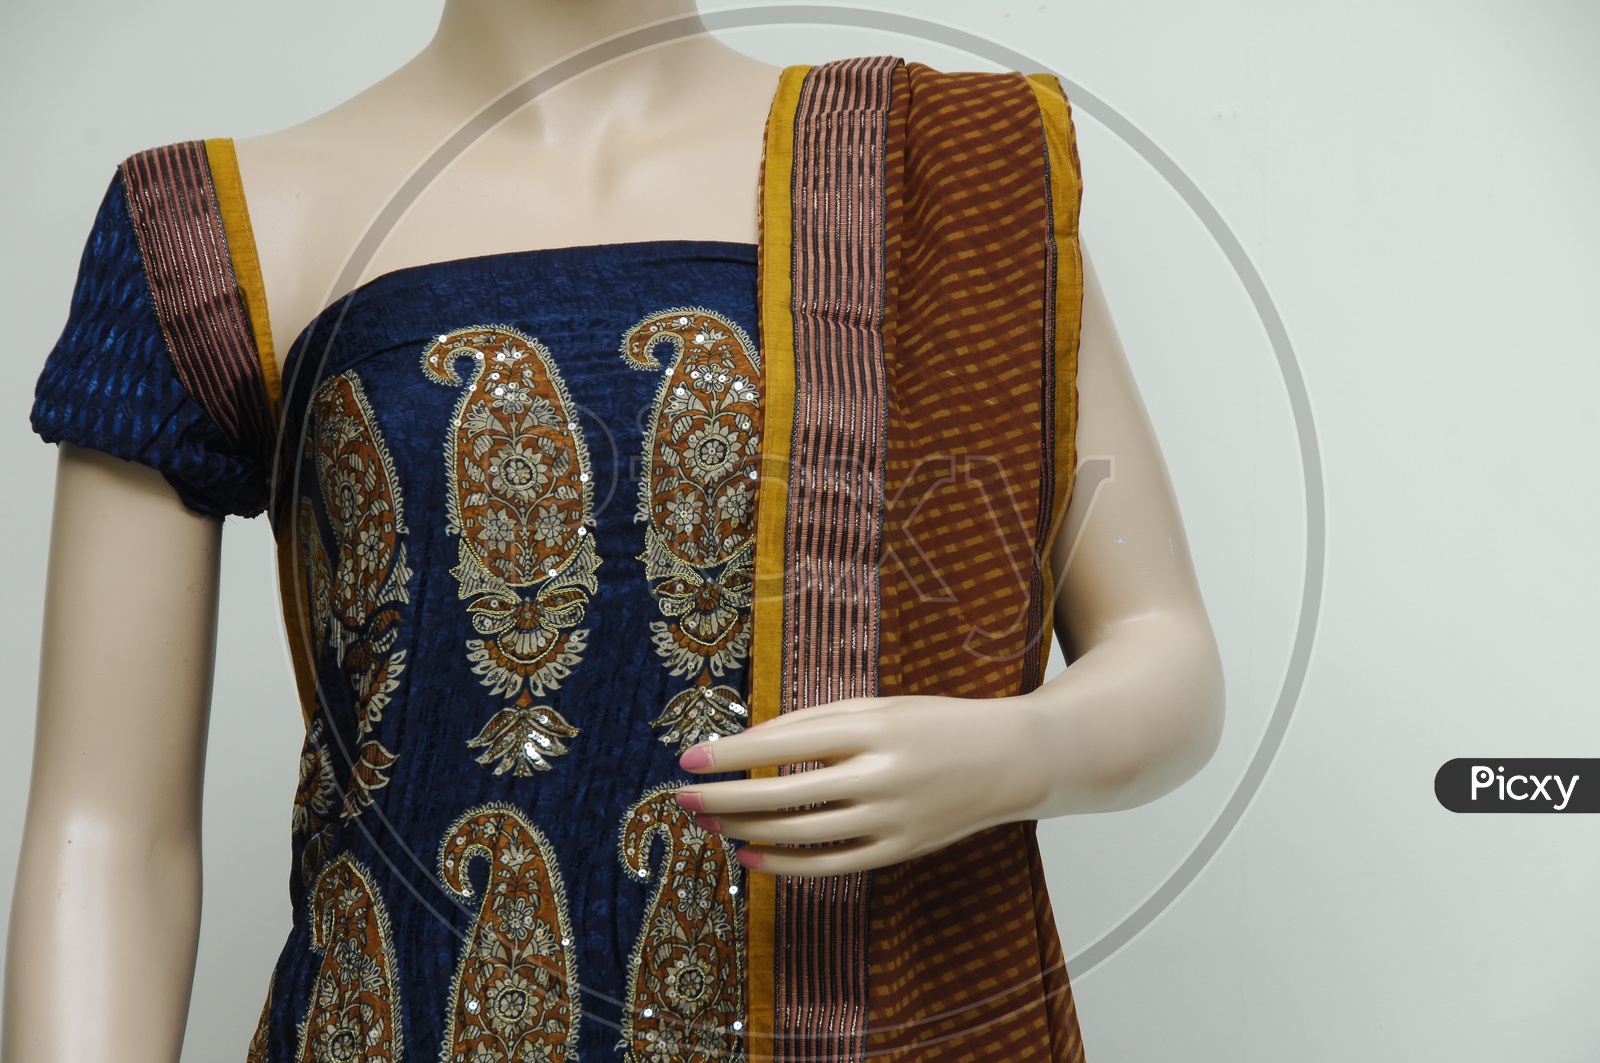 Mannequin draped in a printed salwar suit